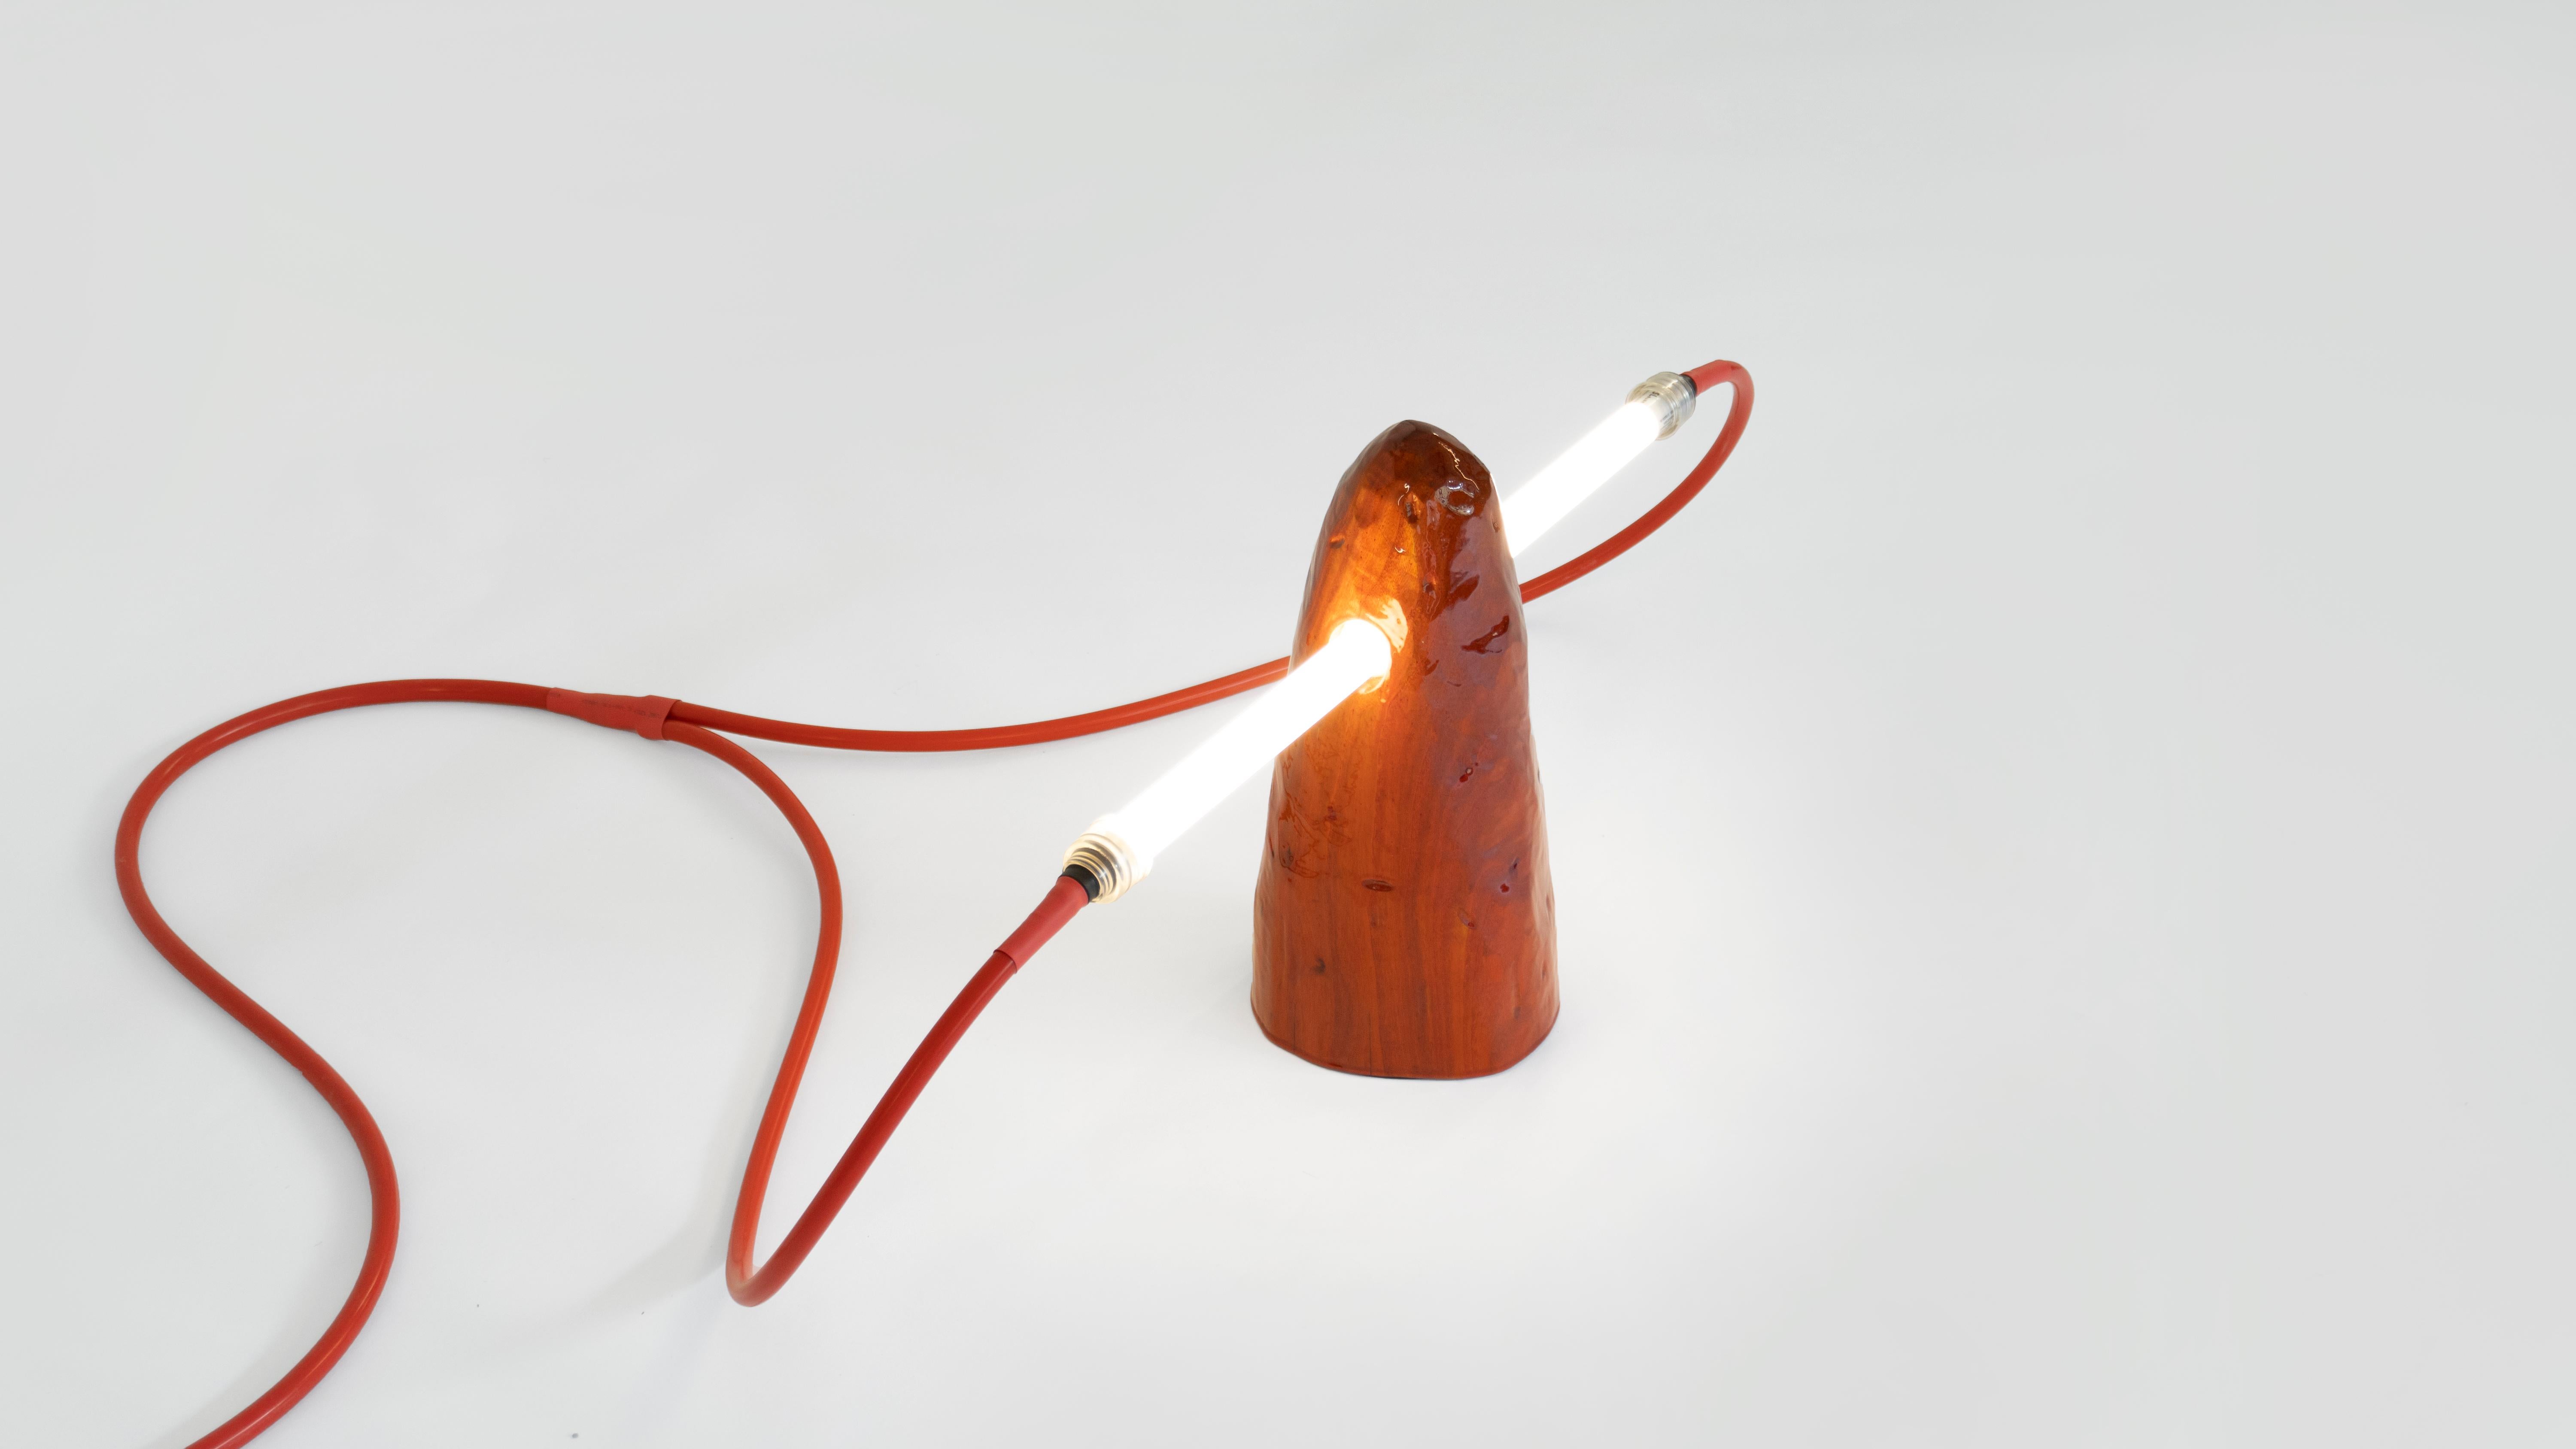 Three Spike Table Lamp by Henry D'ath
Dimensions: D 90 x W 15 x H 35 cm
Materials: Wood.
Available finishes: natural, black ink, clear red gloss. 


Henry d’ath is a New Zealand-born, Hong Kong-based artist and architect. 
Using predominantly